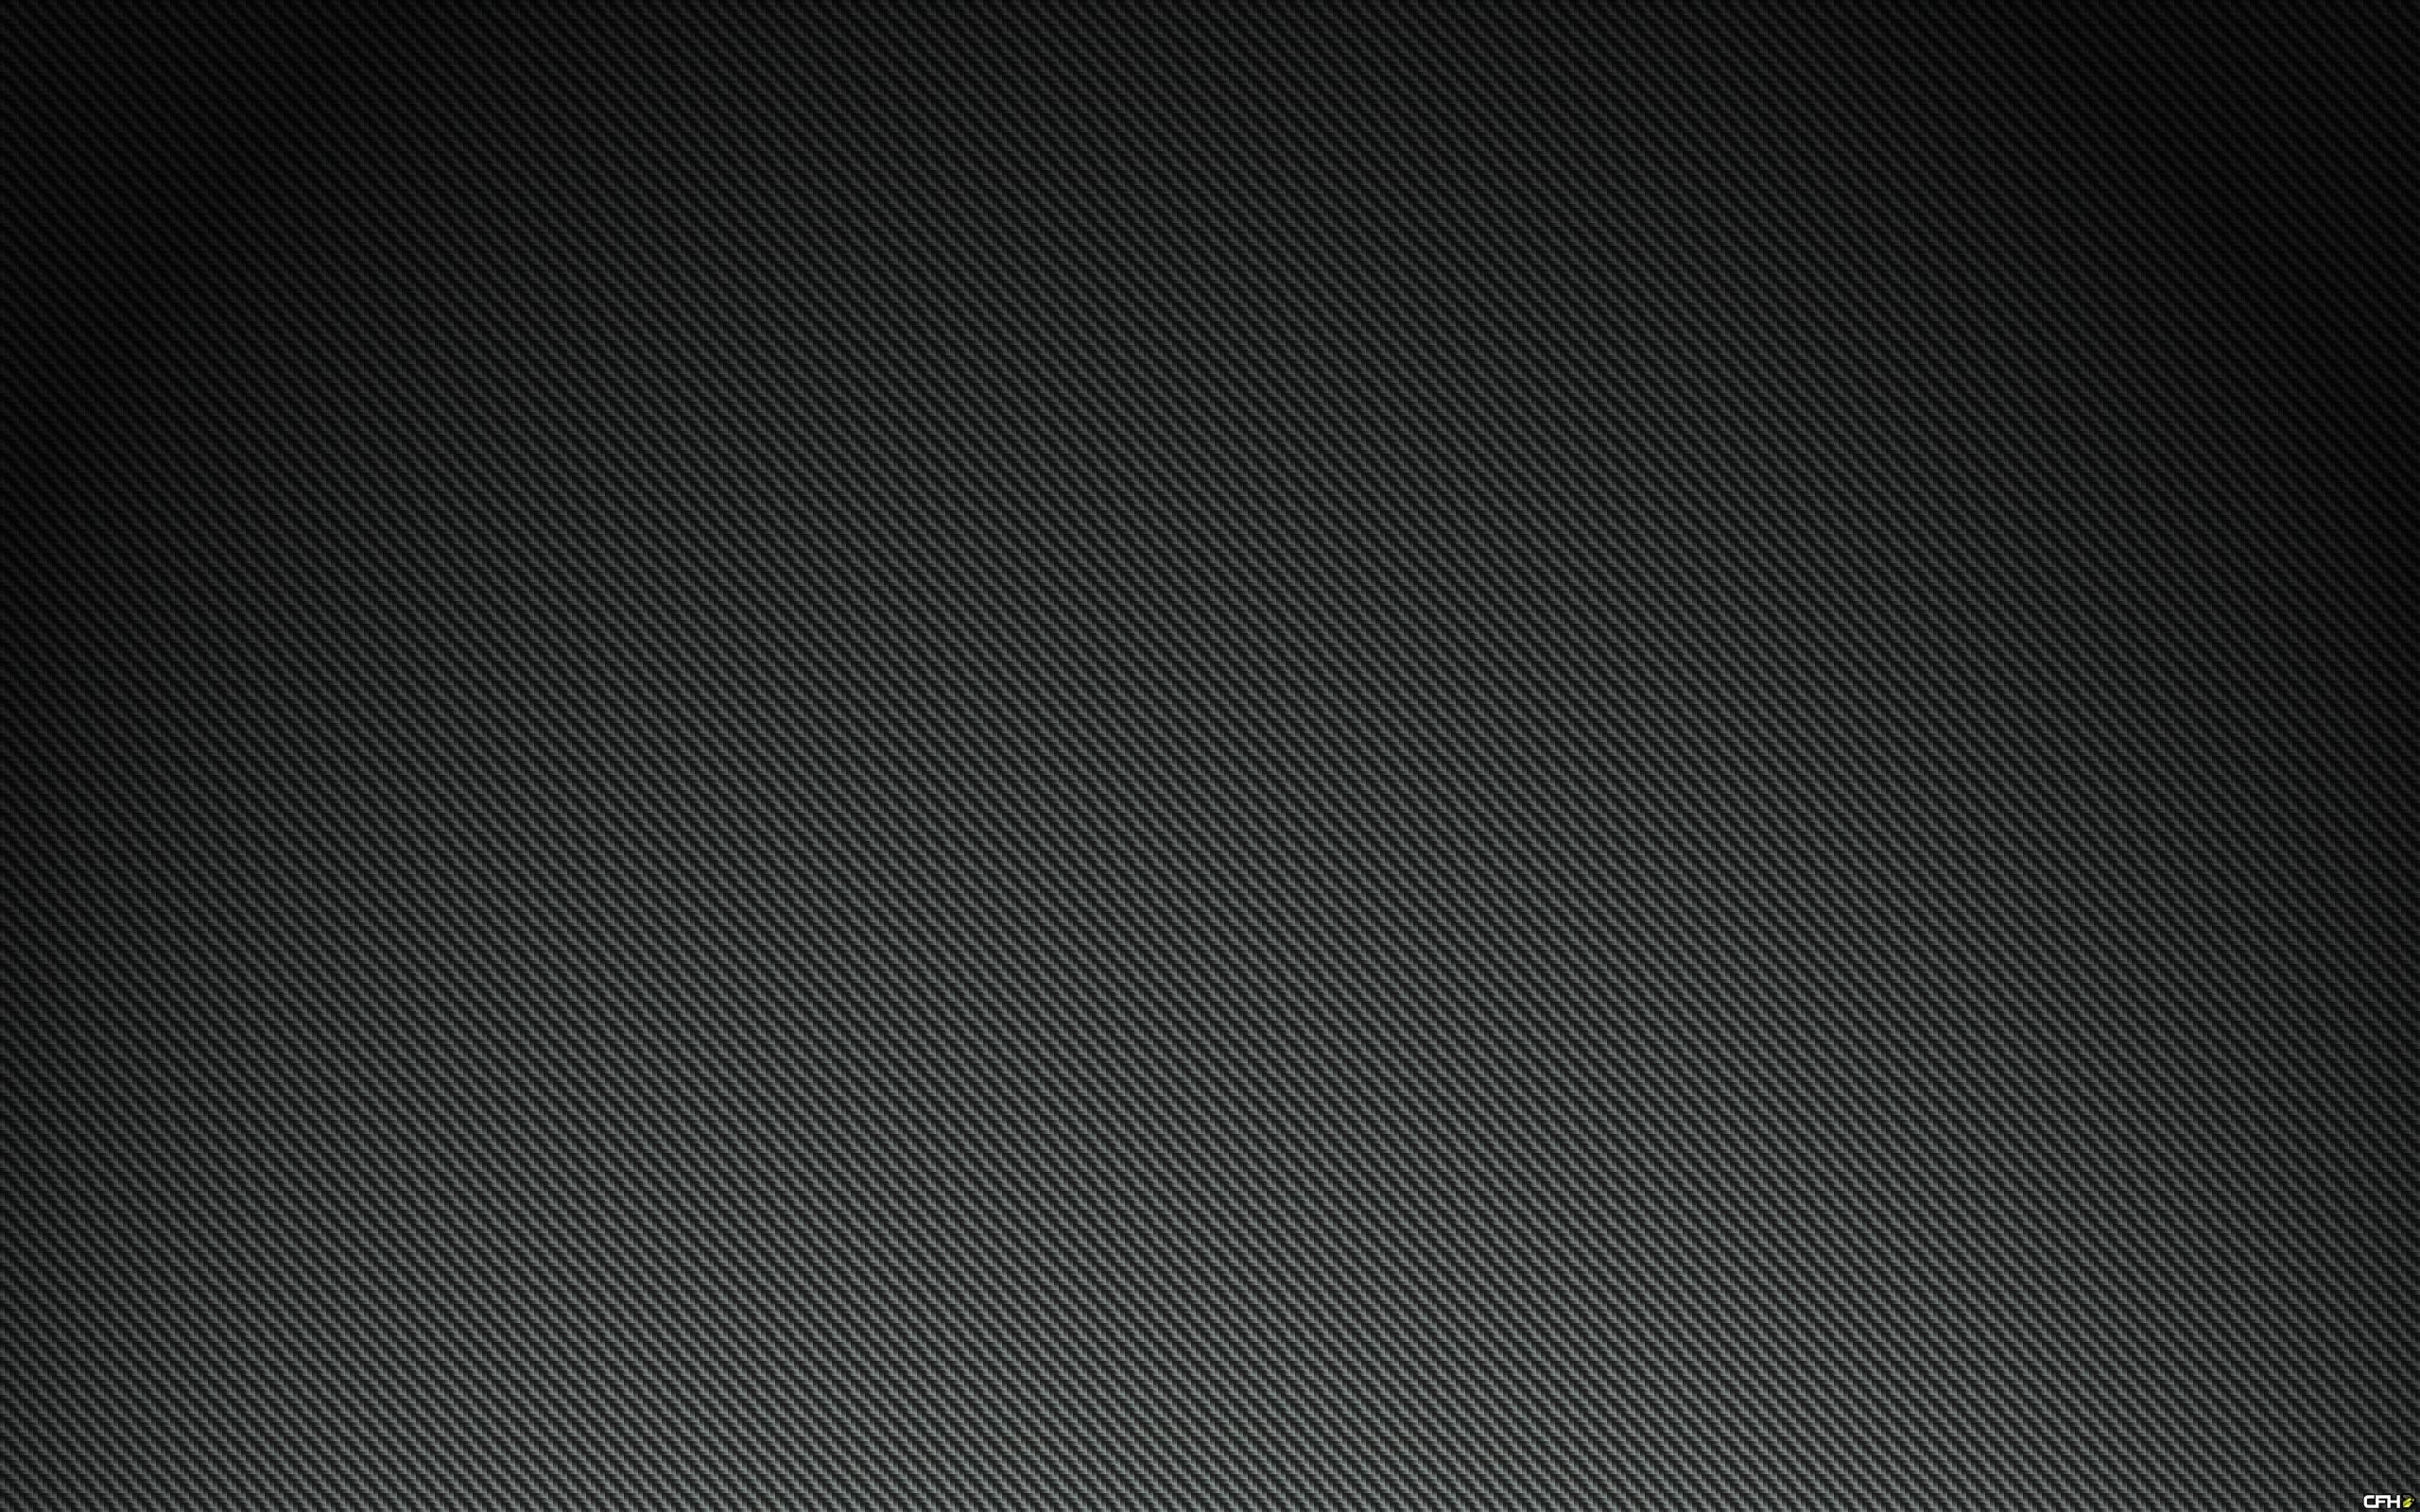 2560x1600 Title : carbon fiber wallpaper group with 27 items. Dimension : 2560 x  1600. File Type : JPG/JPEG